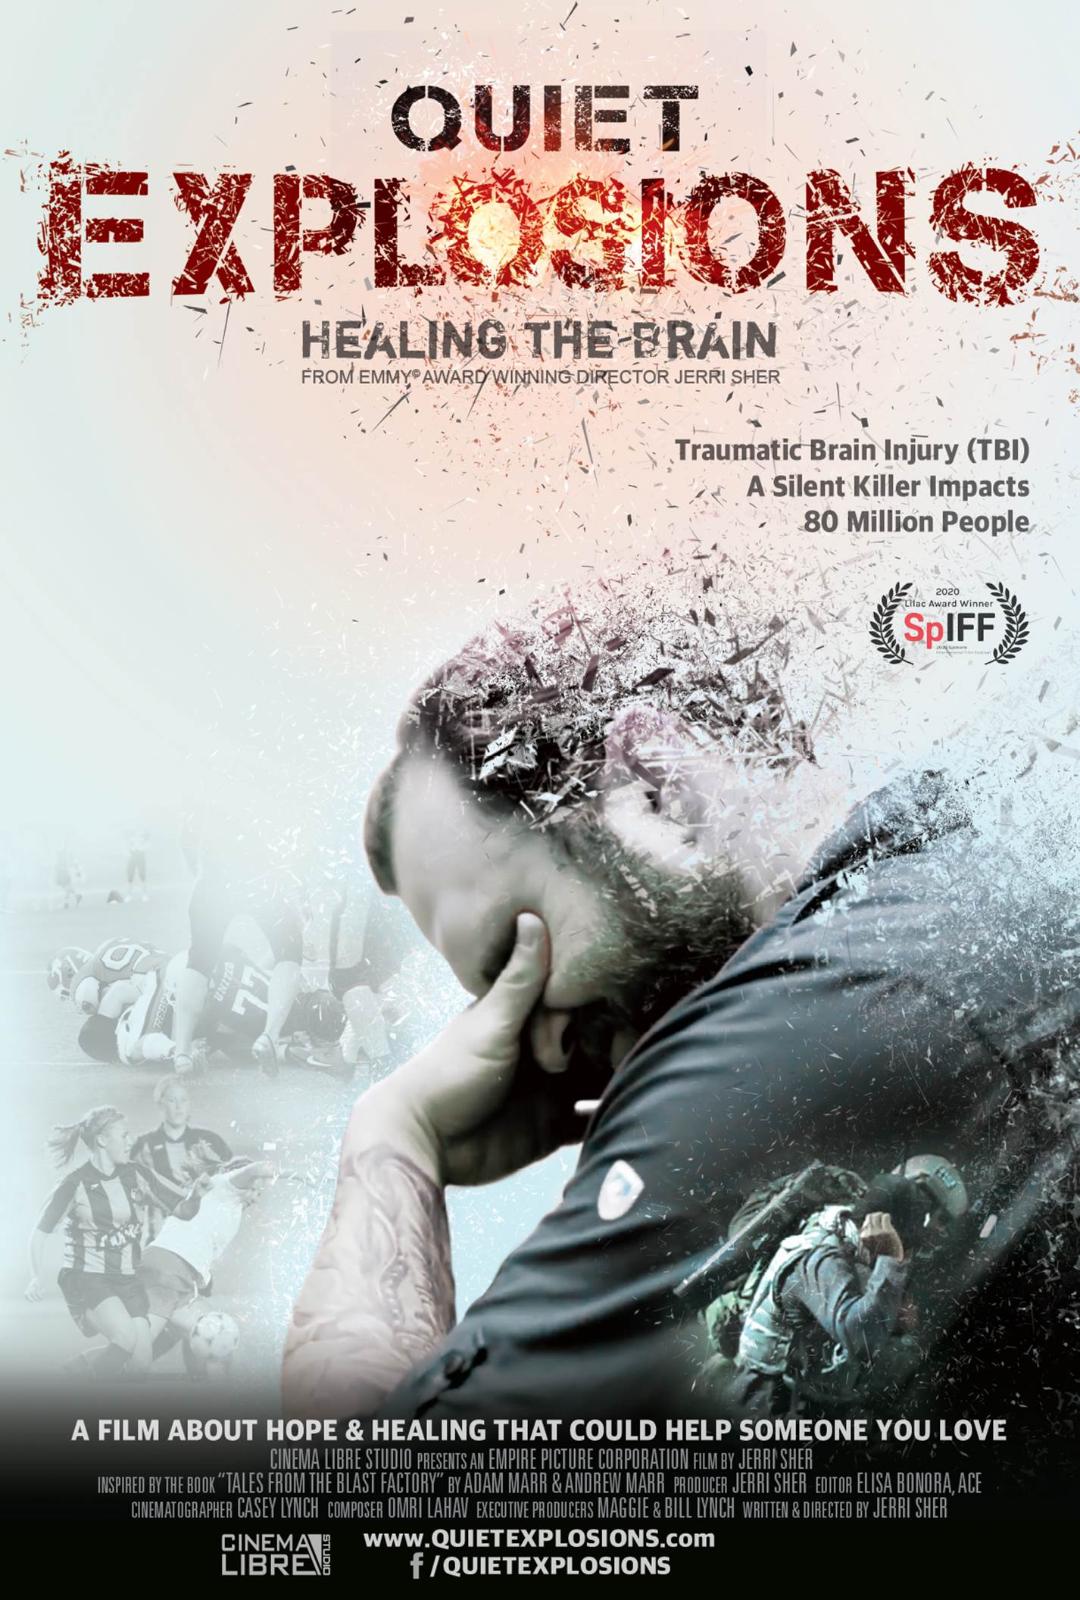 Quiet Explosions Healing The Brain movie poster with a man in pain. 